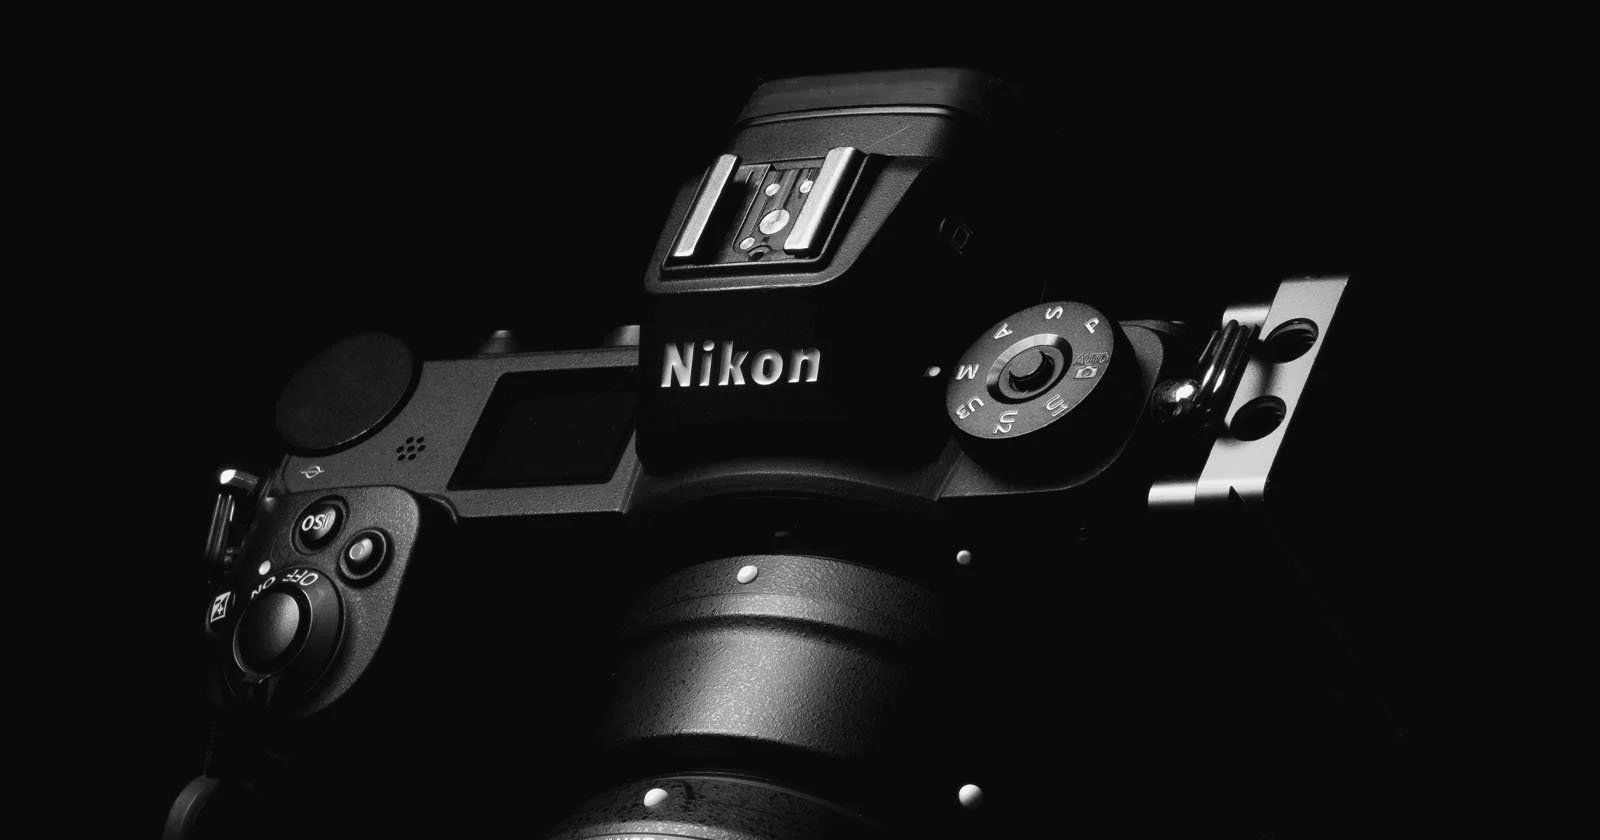  nikon financial results show better than expected performance 